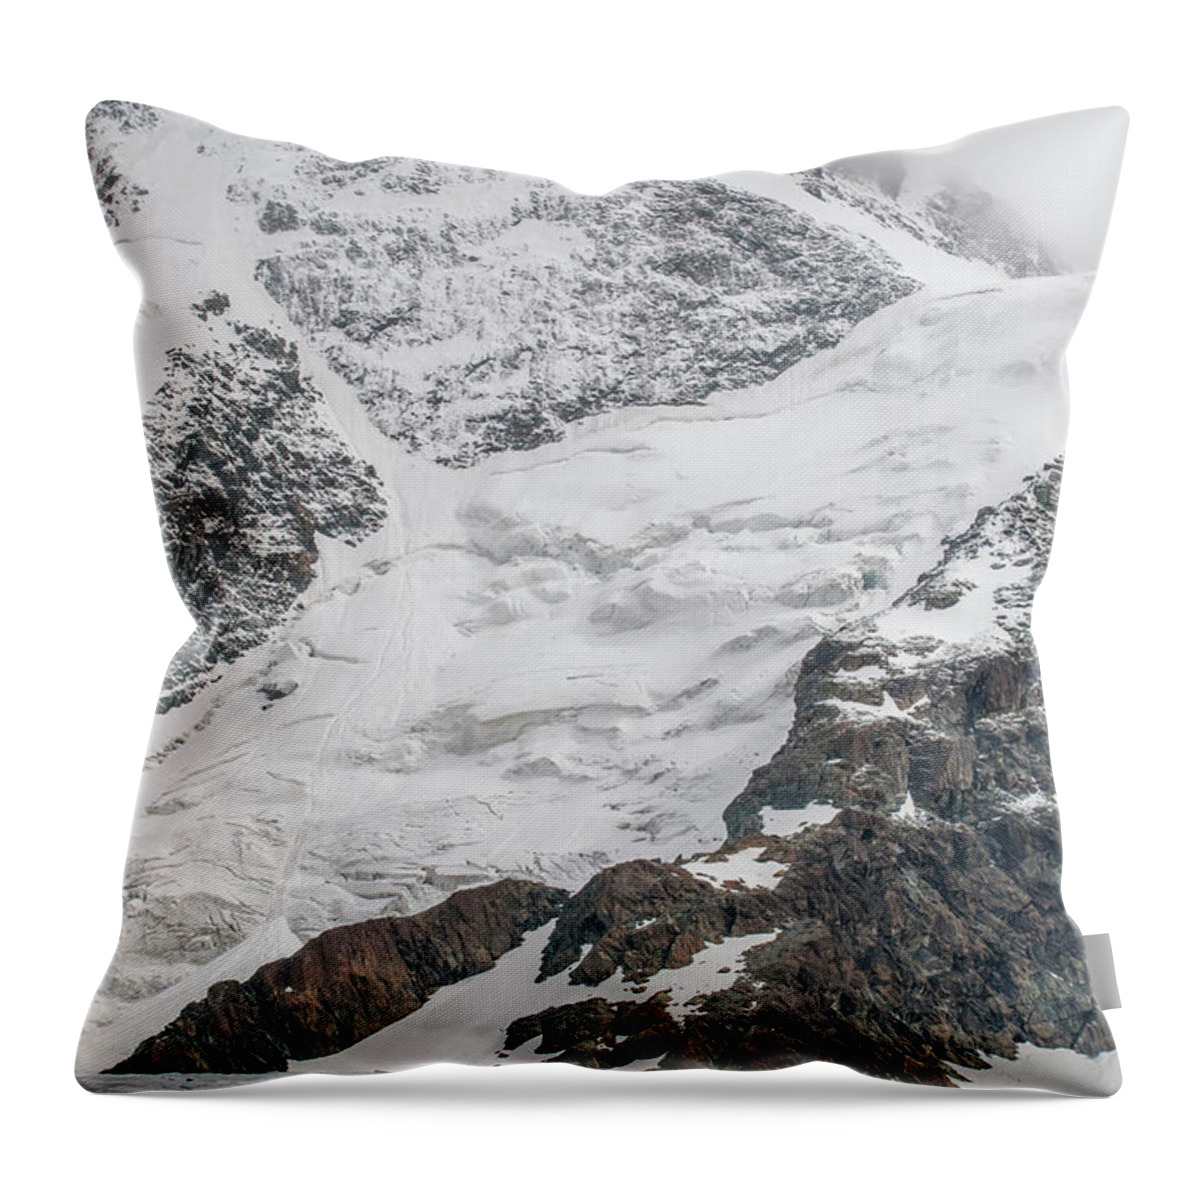 Winter Throw Pillow featuring the photograph Person Cheering On A Glacier by Thomas Bekker